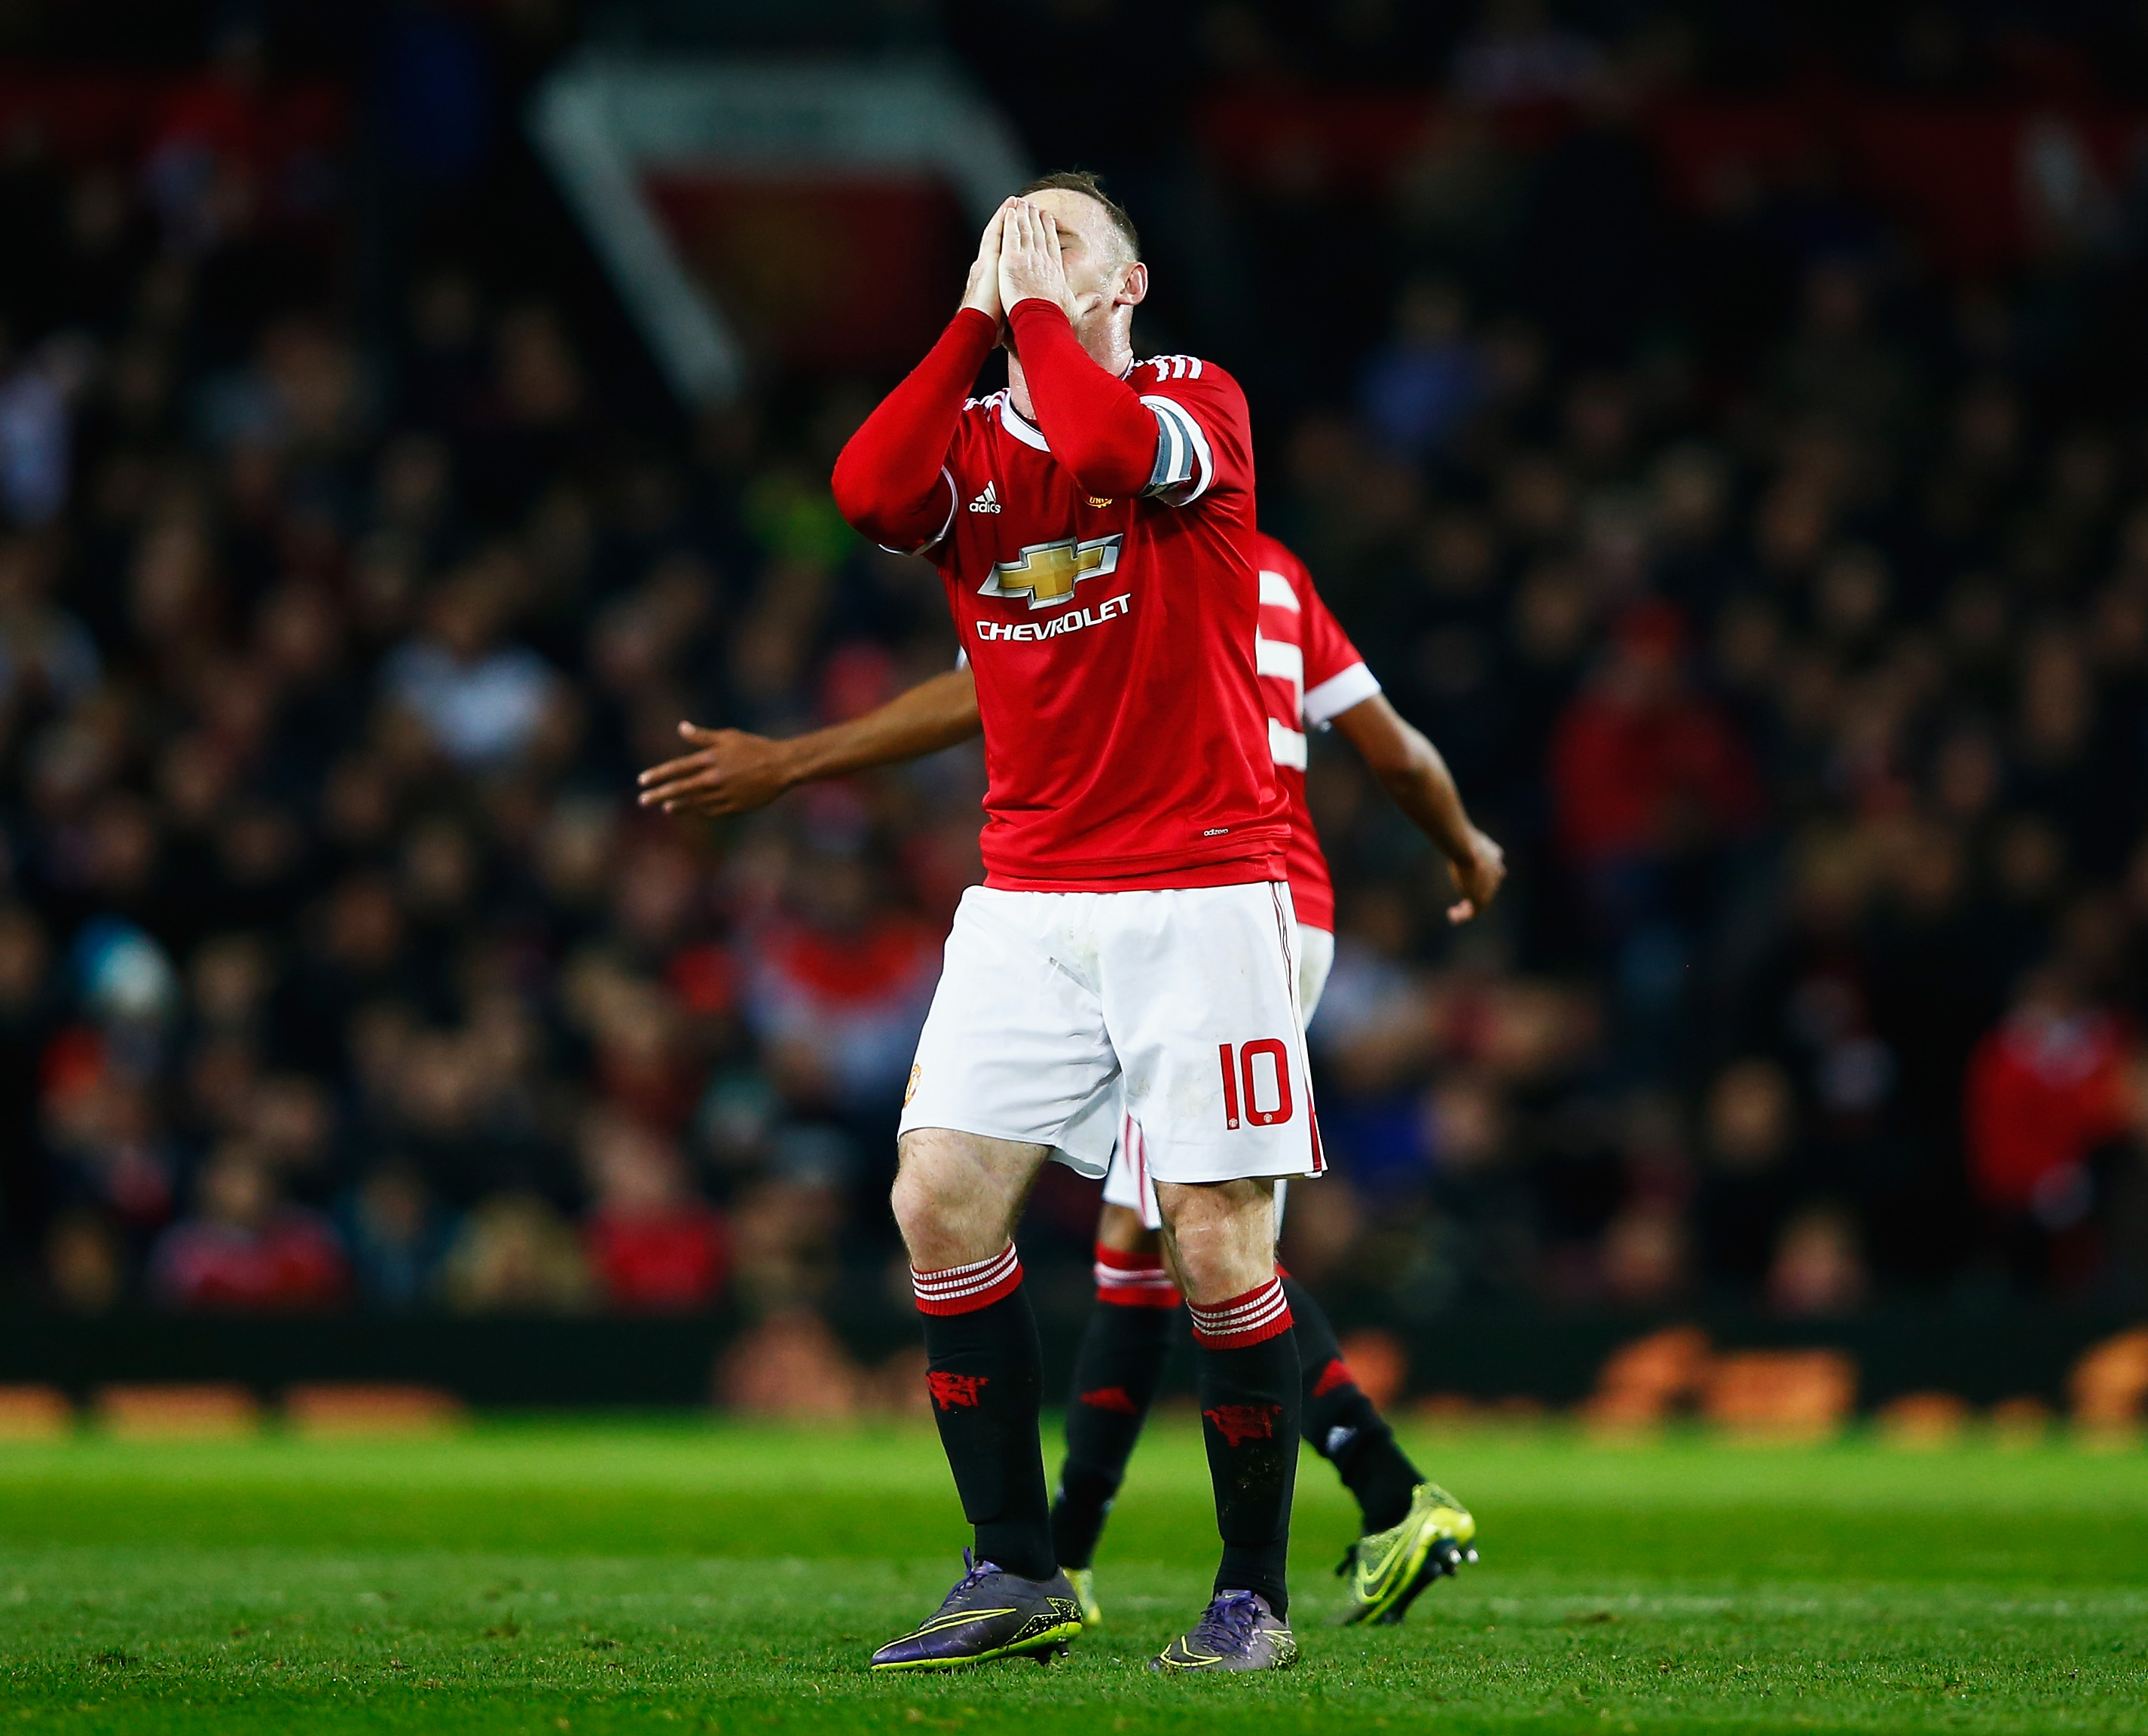 United (and Rooney) look to rebound from Wednesday's Capital One Cup exit to Middlesbrough